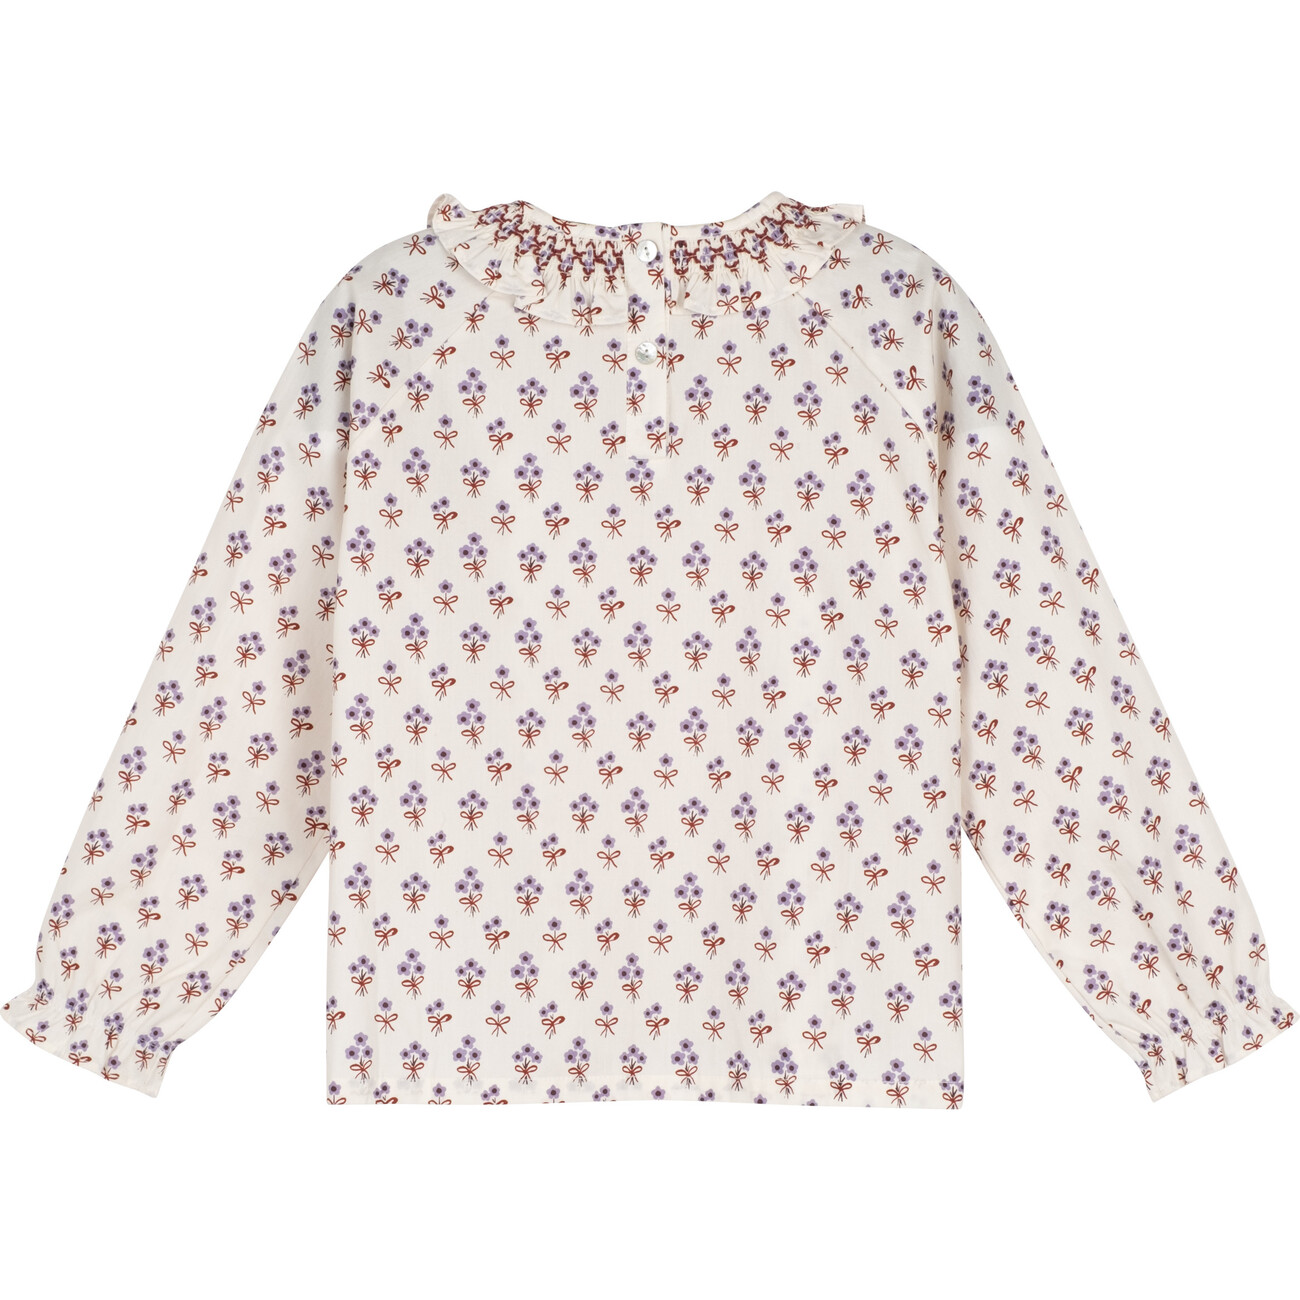 Jonie Collared Blouse, Cream & Lavender Ditsy Floral - Maison Me